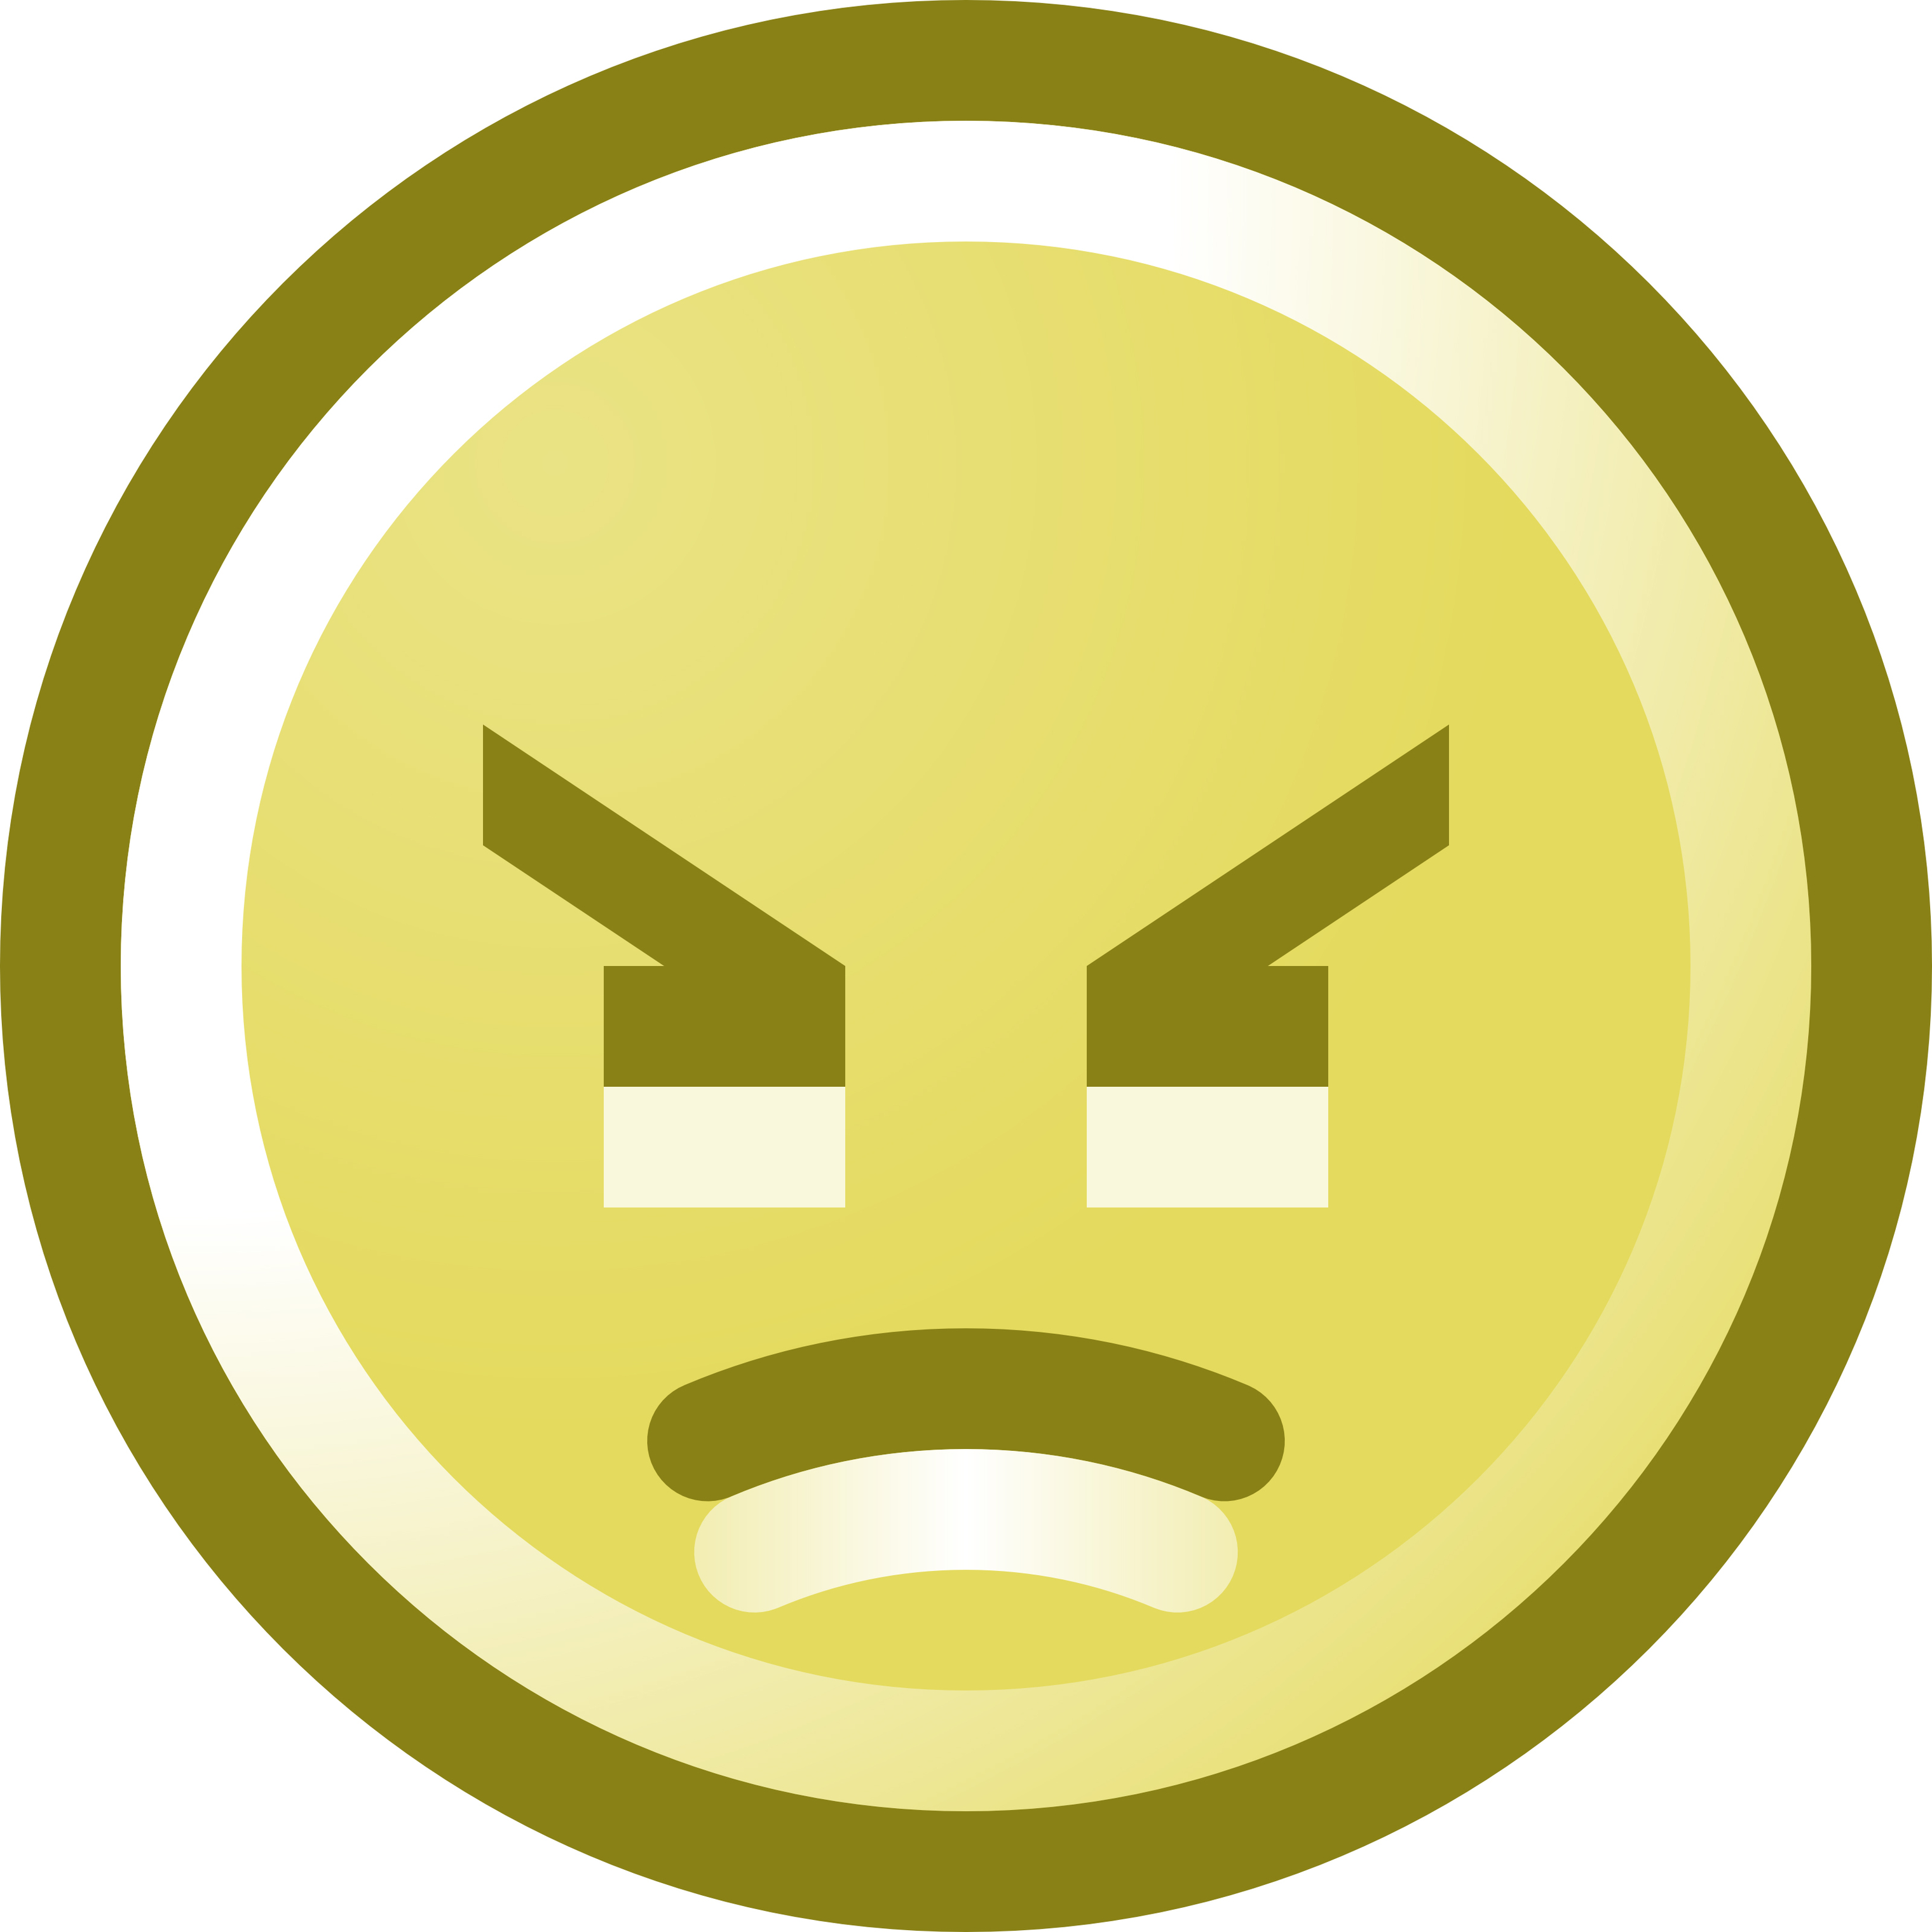 Grumpy Smiley Face Clipart - Free to use Clip Art Resource